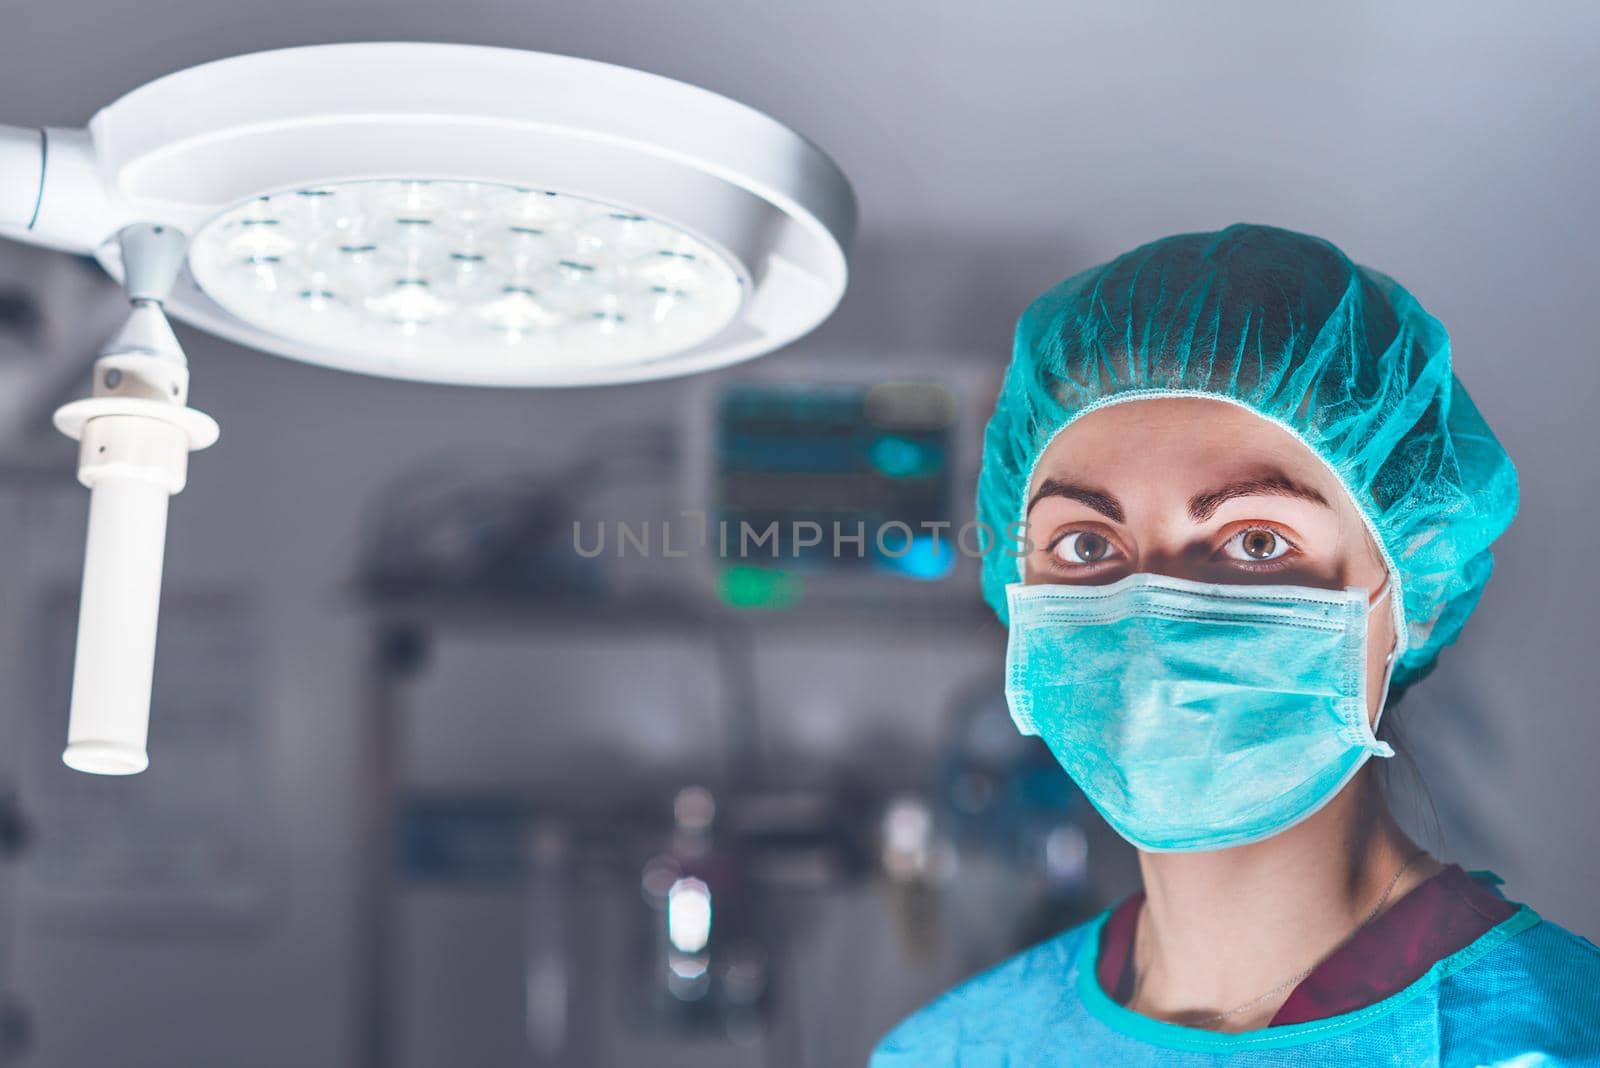 Female surgeon in operating theater by HERRAEZ